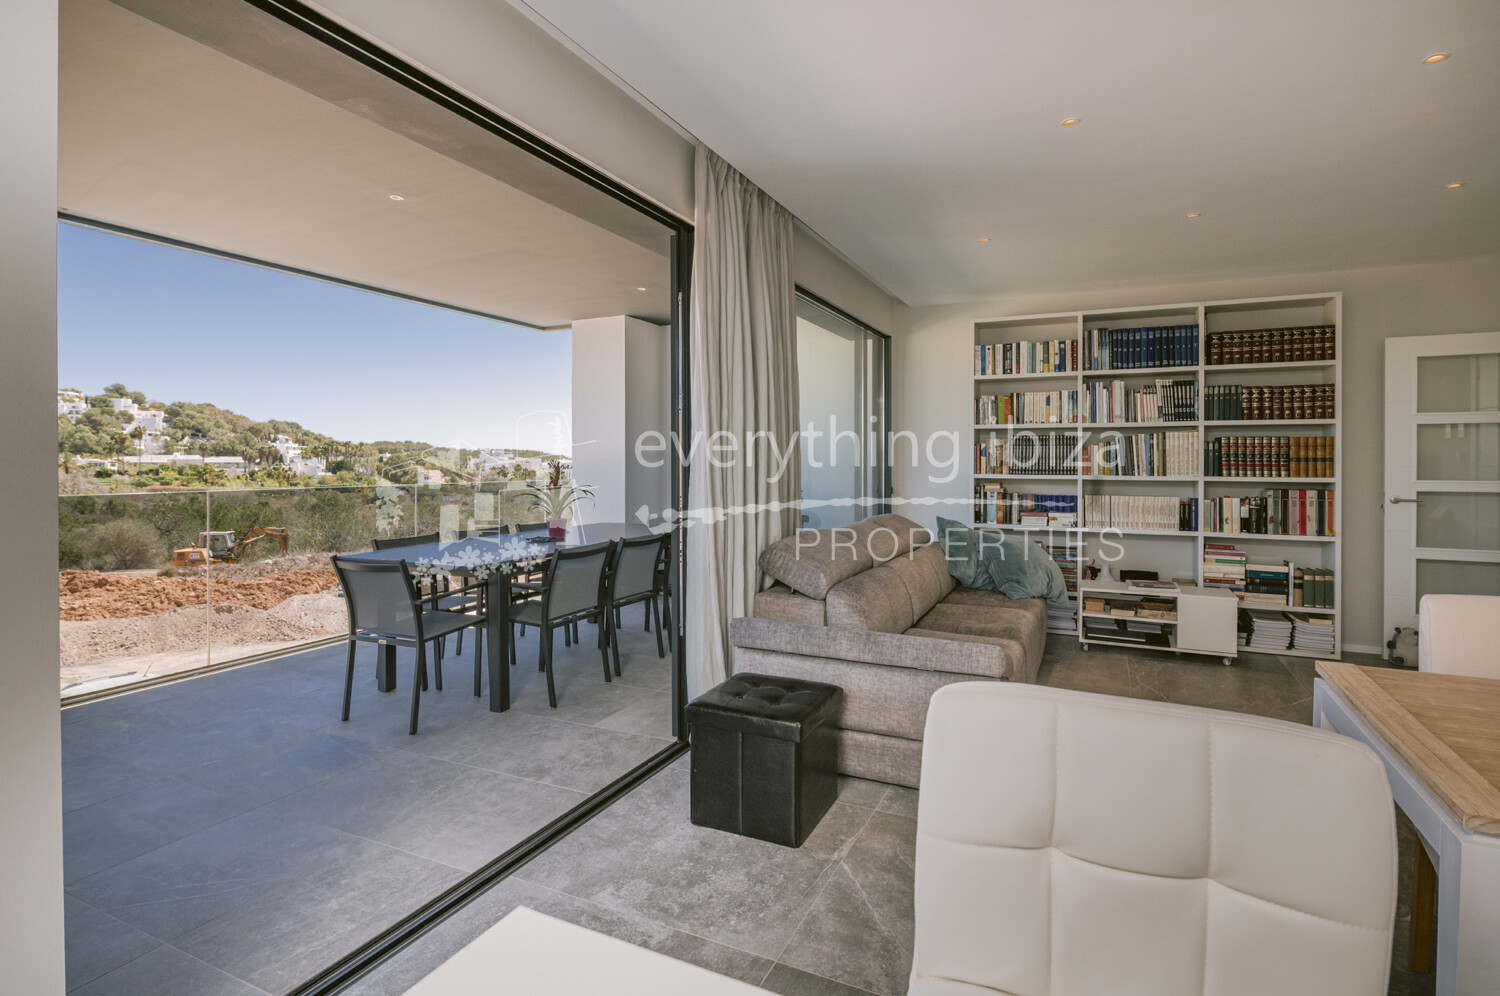 Luxury Modern 3 Bedroomed Apartment Close to Talamanca Beach, ref. 1694, for sale in Ibiza by everything ibiza Properties